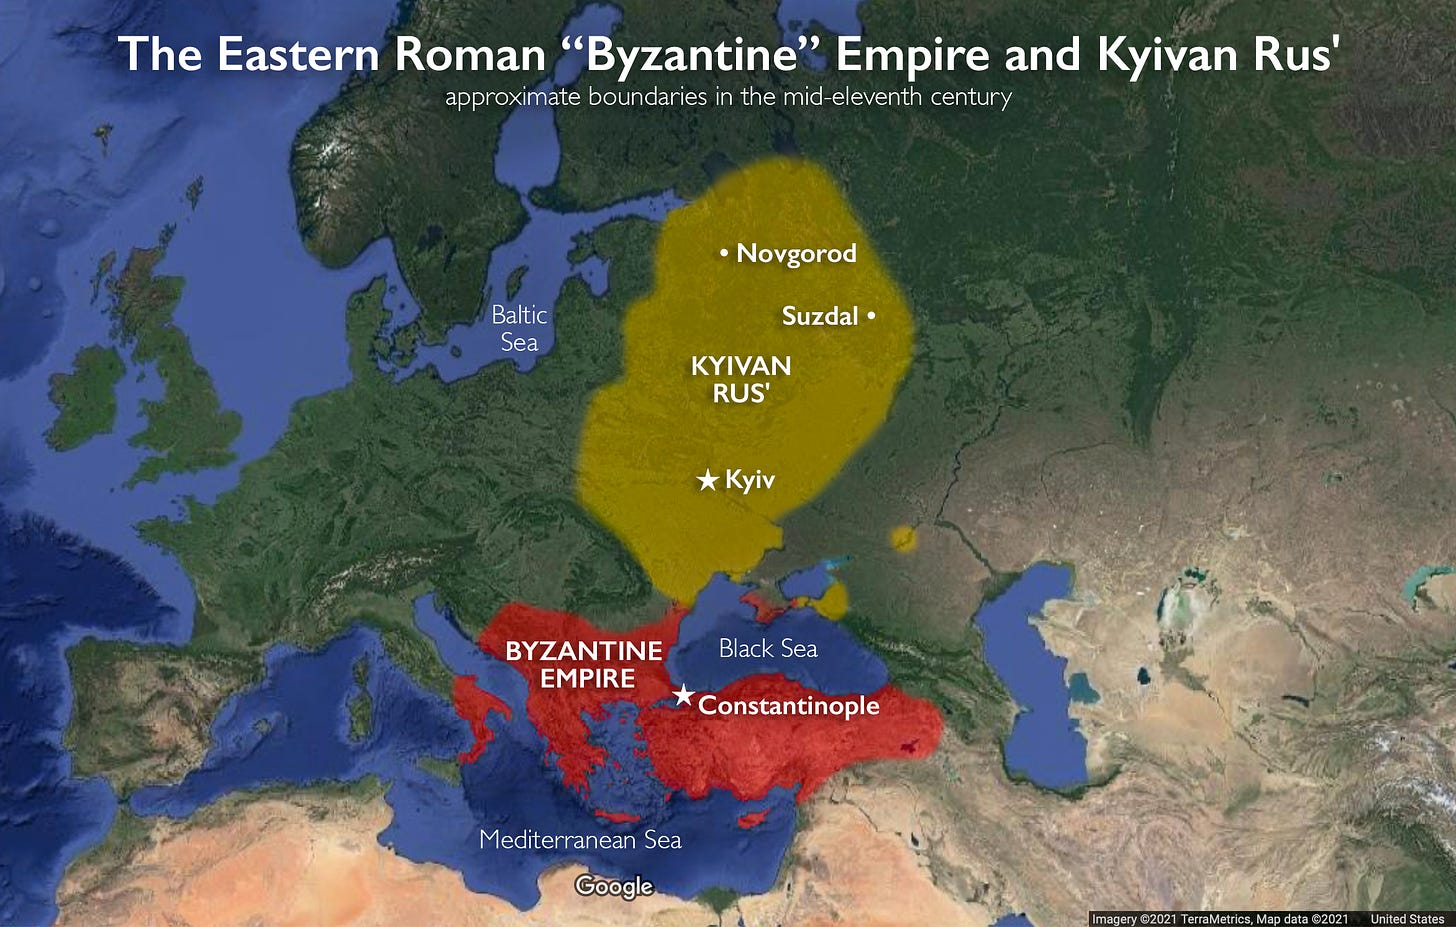 Map of the Byzantine Empire and Kievan Rus' (underlying map © Google)